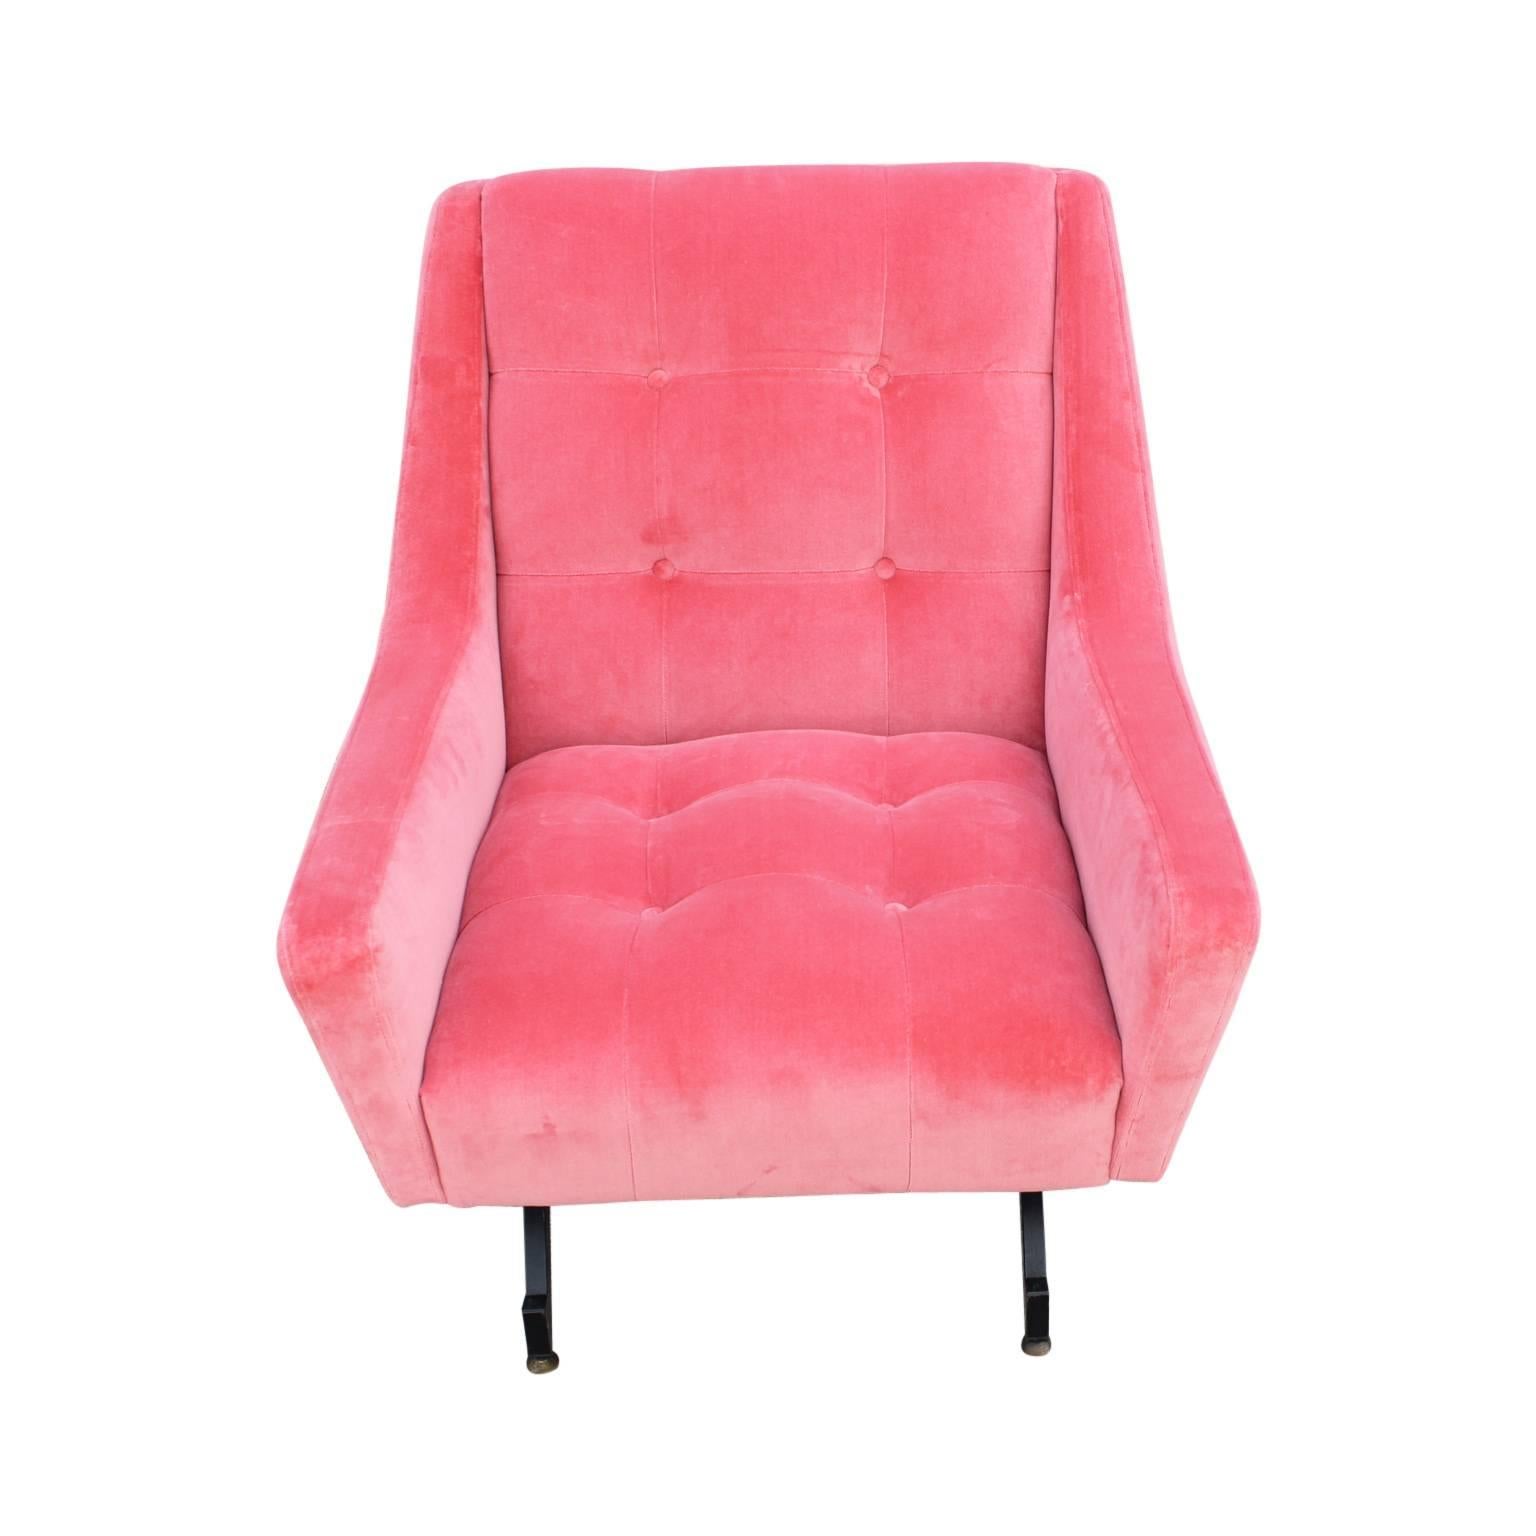 Gorgeous pair of lounge chairs recently reupholstered in coral pink velvet with adjustable legs. Wonderful statement pieces.